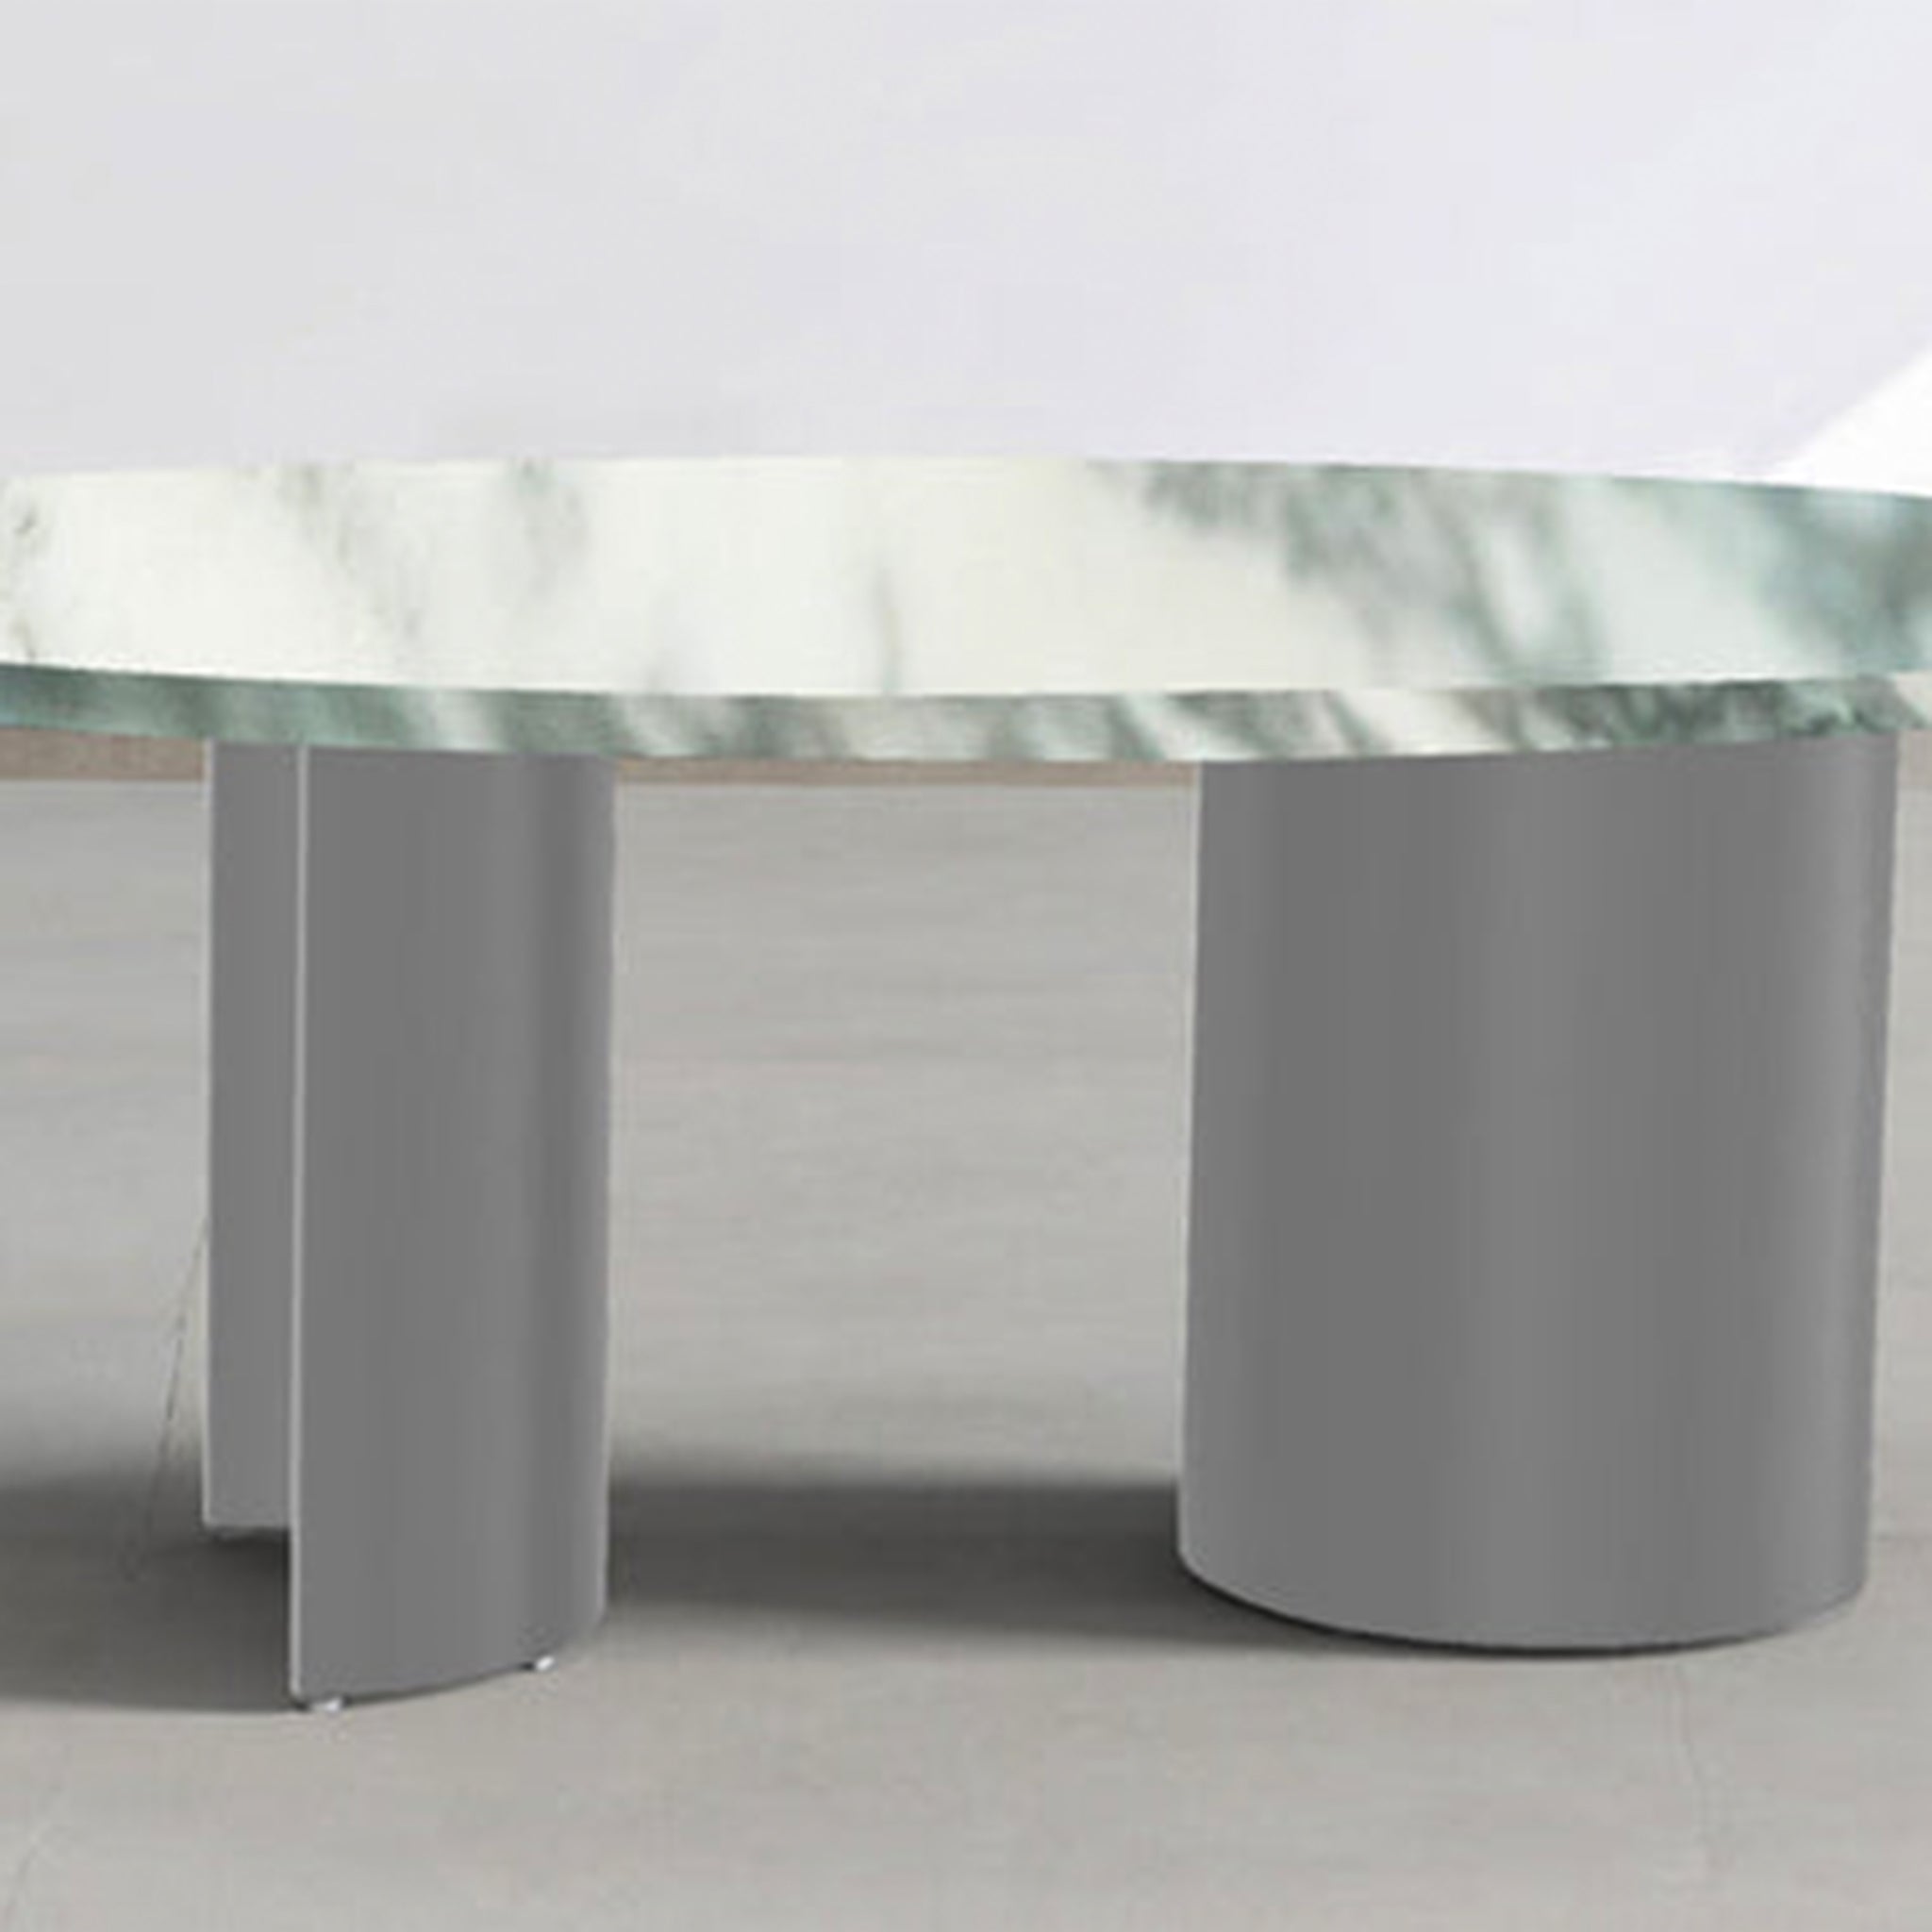 Statement Coffee Table: Bold diameter makes a grand impression in your living room.